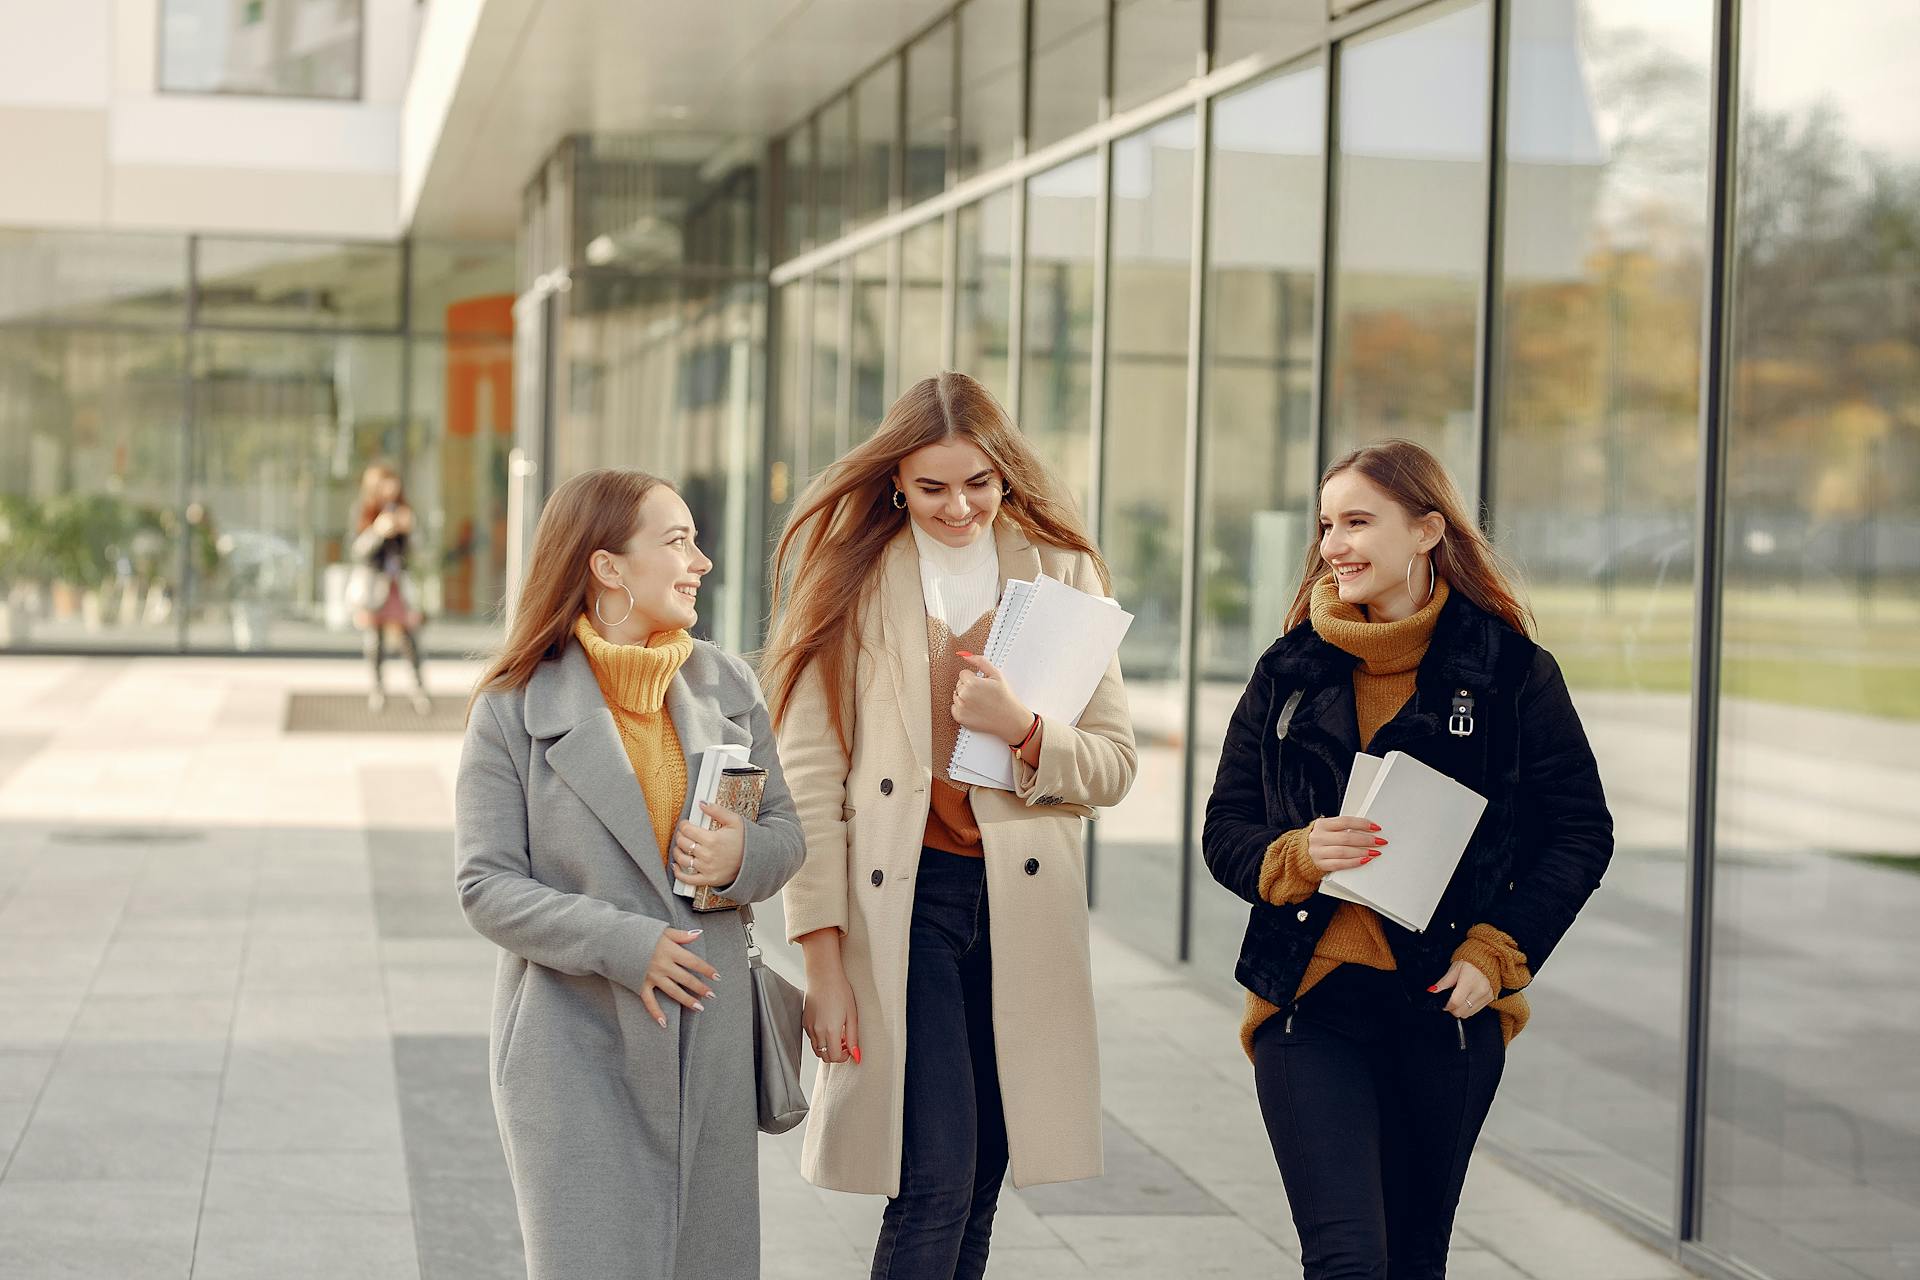 Three female students talking a walk on the college campus | Source: Pexels